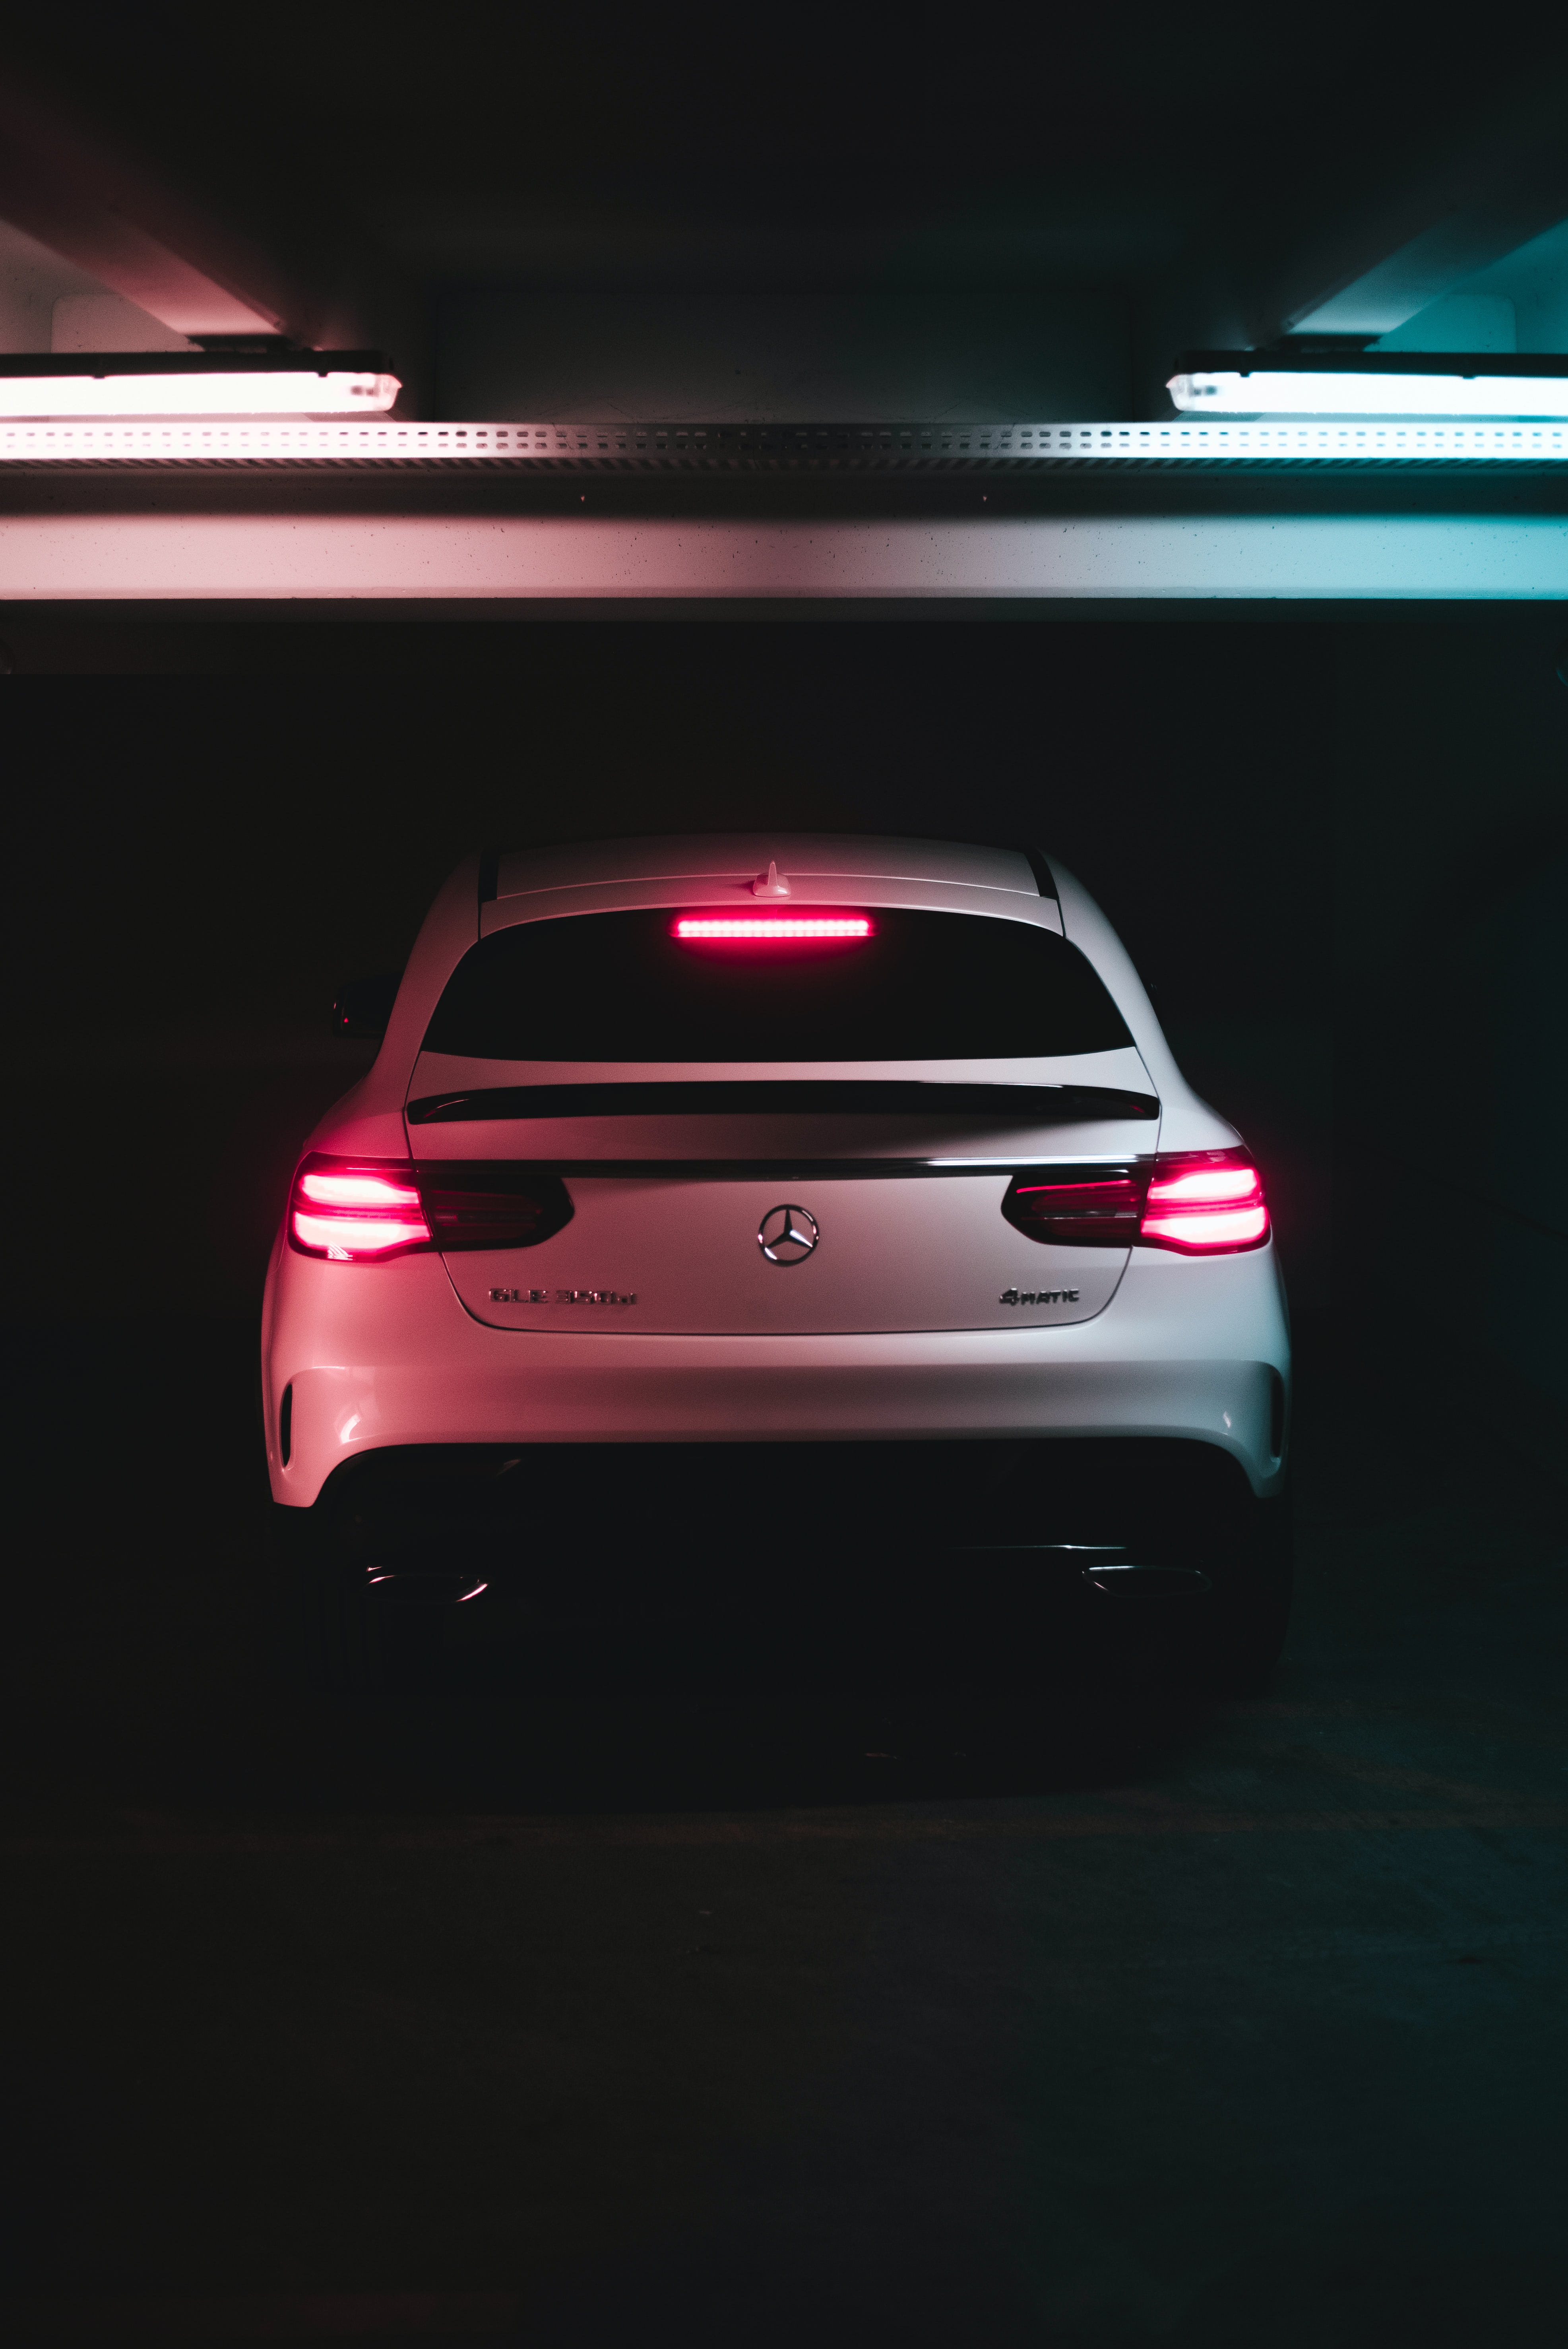 cars, lights, back view, rear view, mercedes benz gle 350d, mercedes, headlights High Definition image